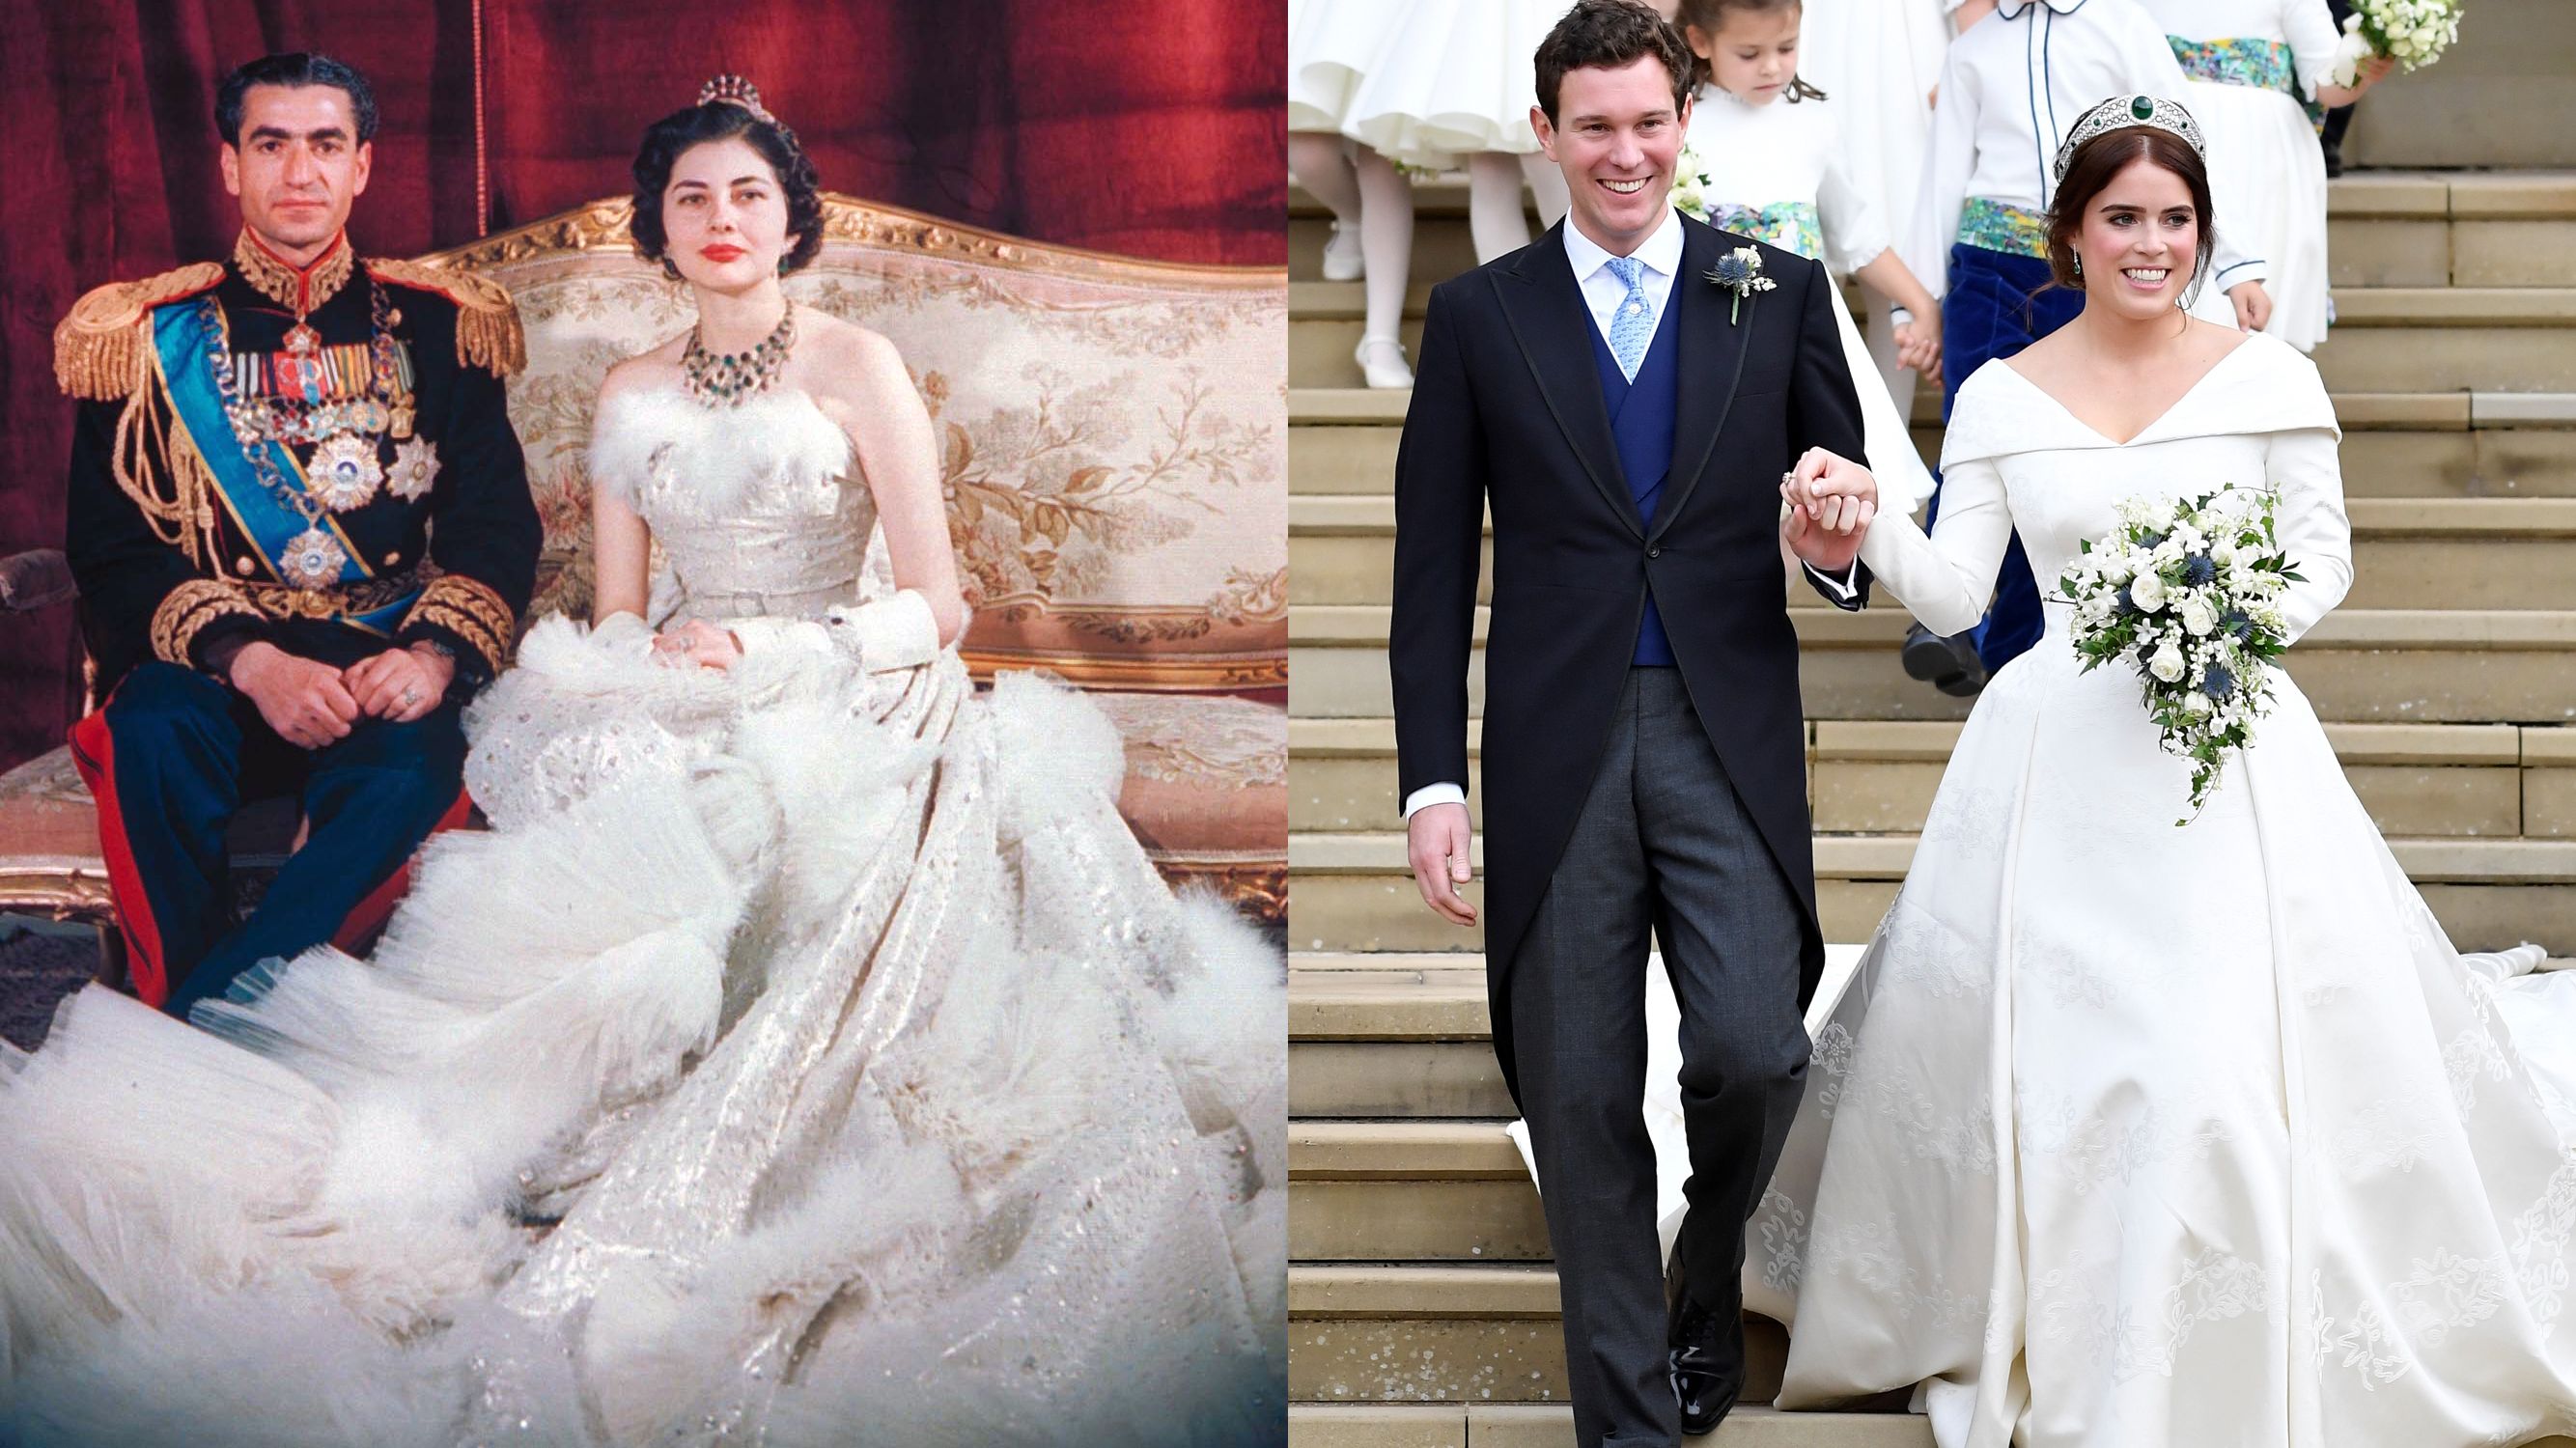 The Best Royal Wedding Dresses of the Last 70 Years - Royal